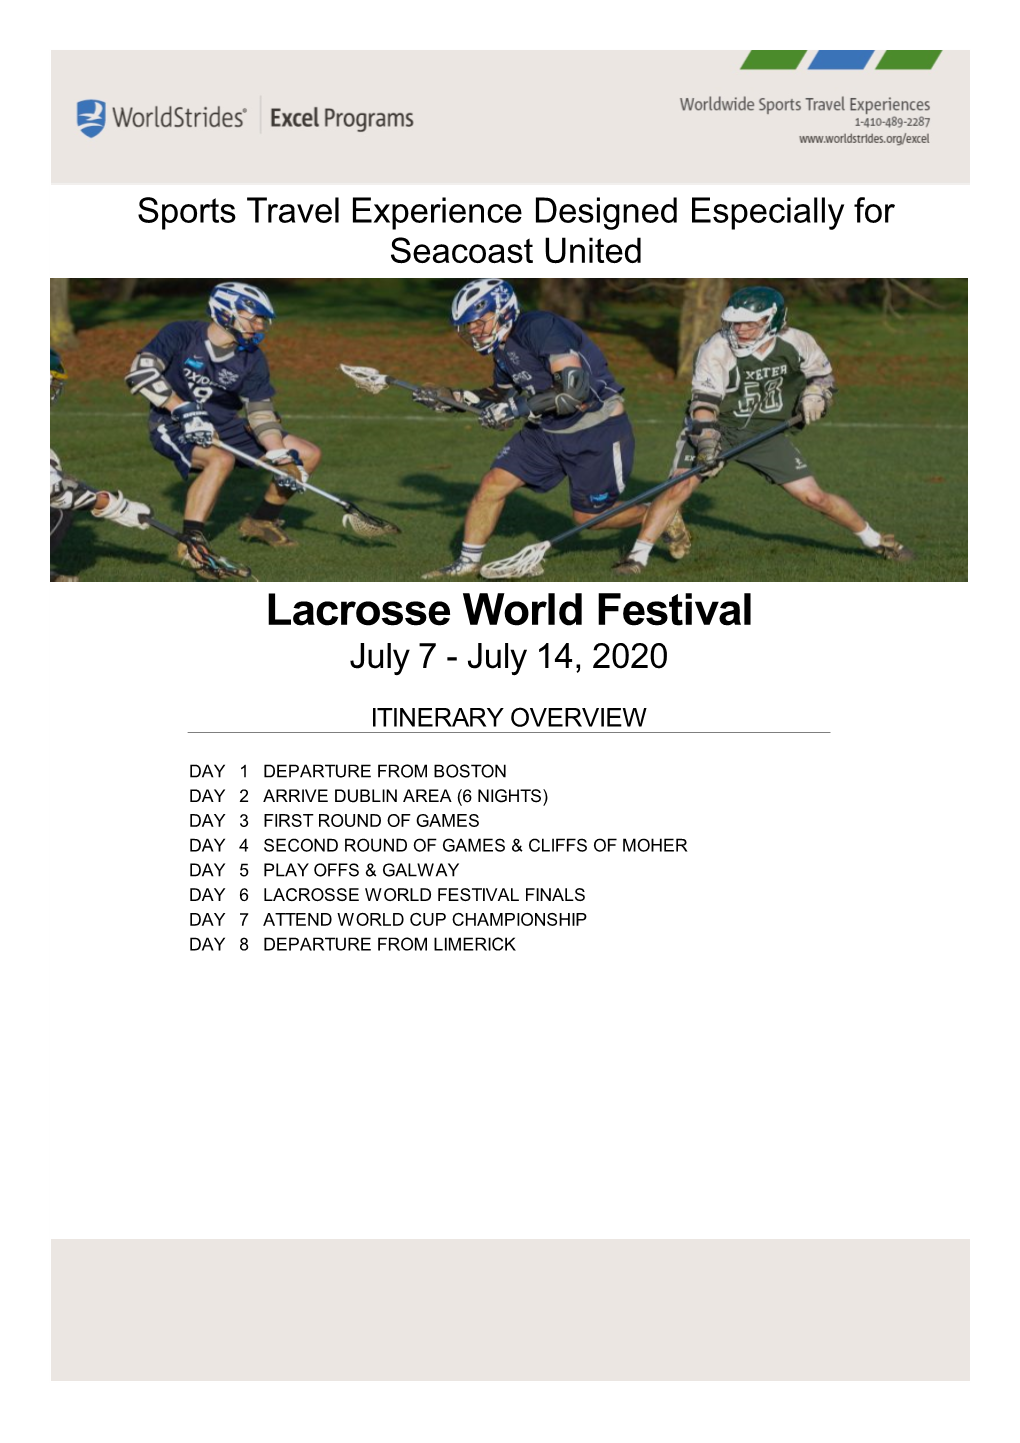 Lacrosse World Festival July 7 - July 14, 2020 ITINERARY OVERVIEW